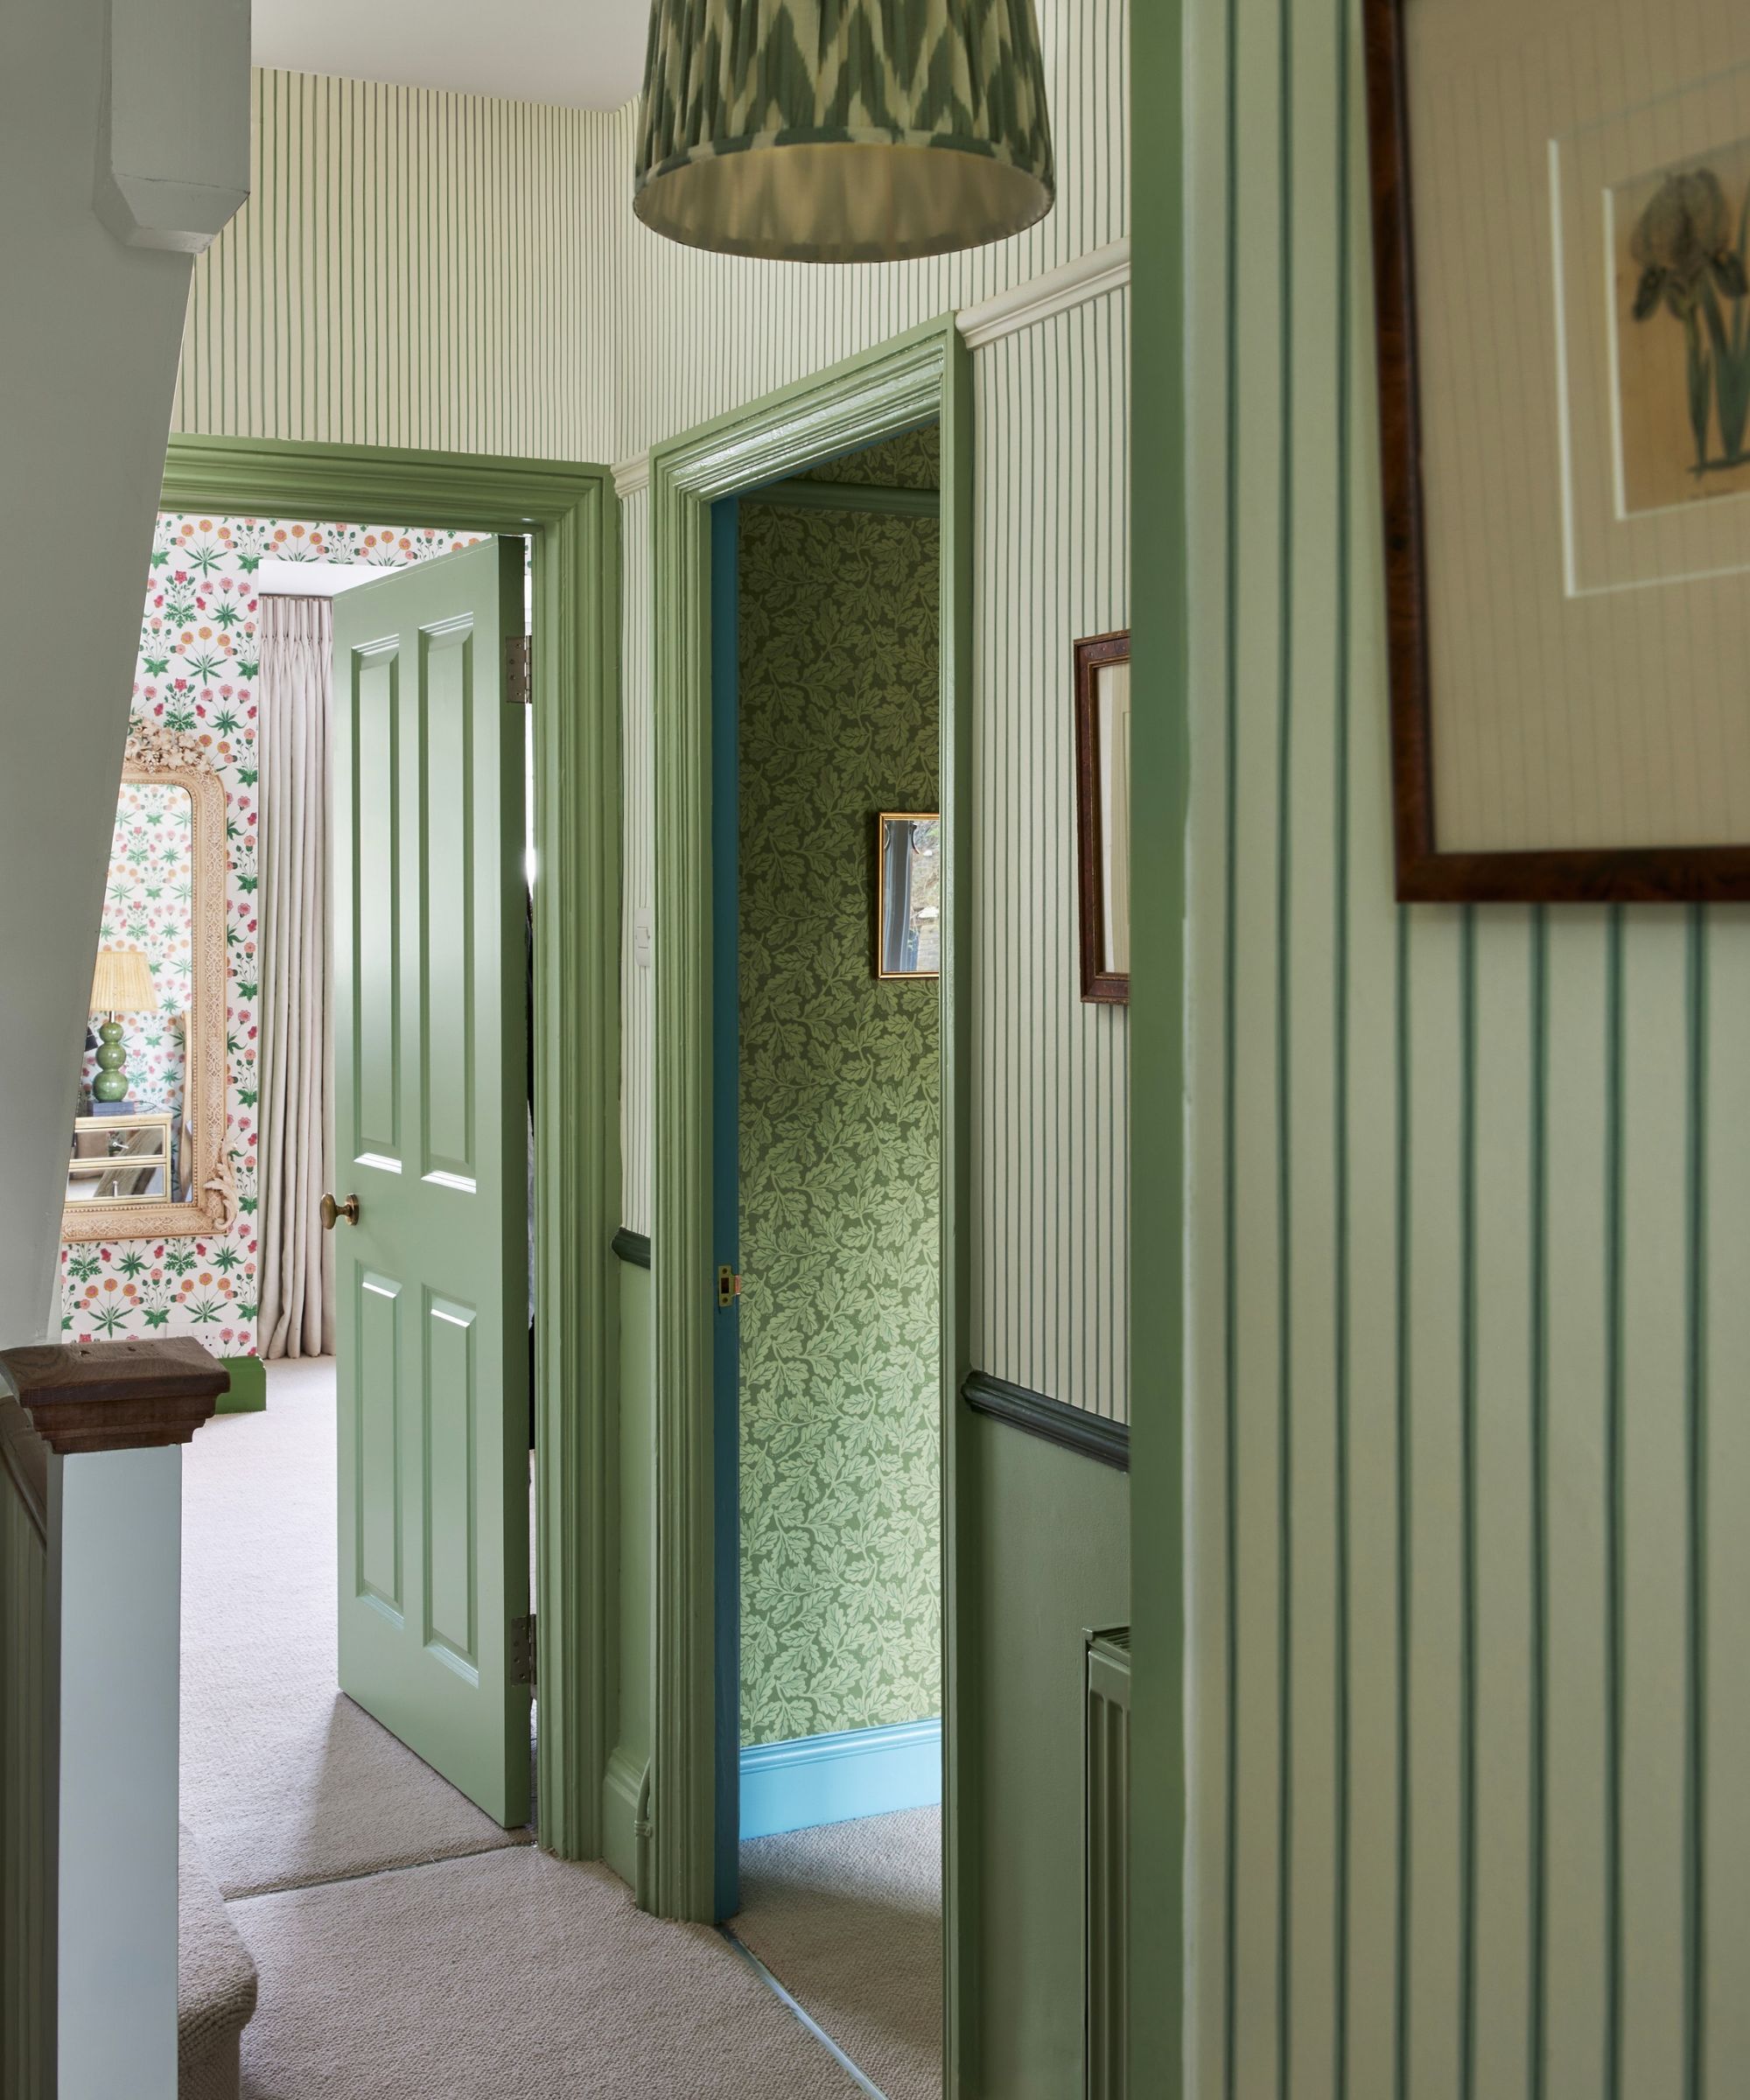 hallway with green striped wallpaper and green painted woodwork trim